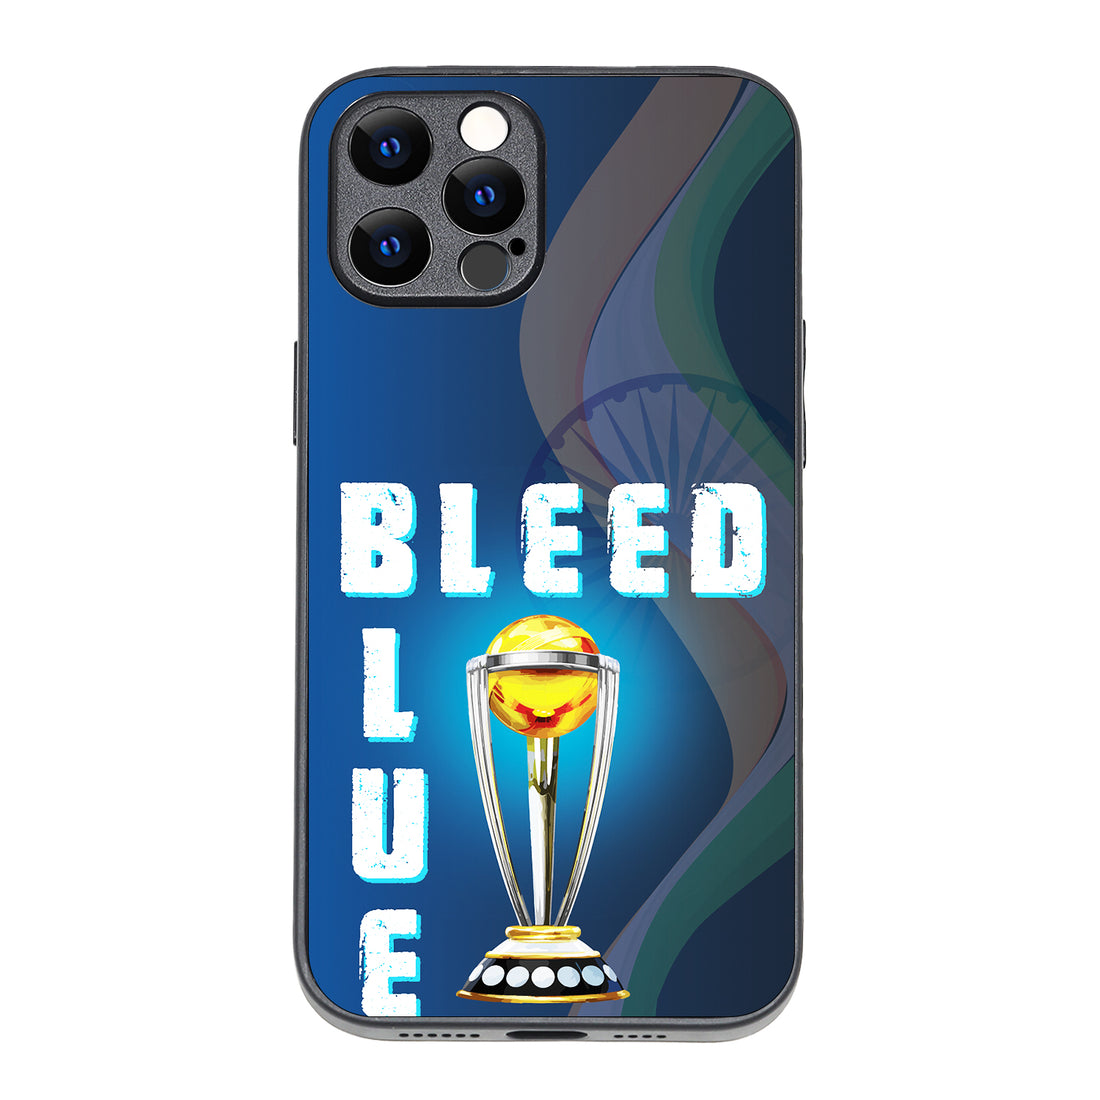 Bleed Blue Sports iPhone 12 Pro Max Case